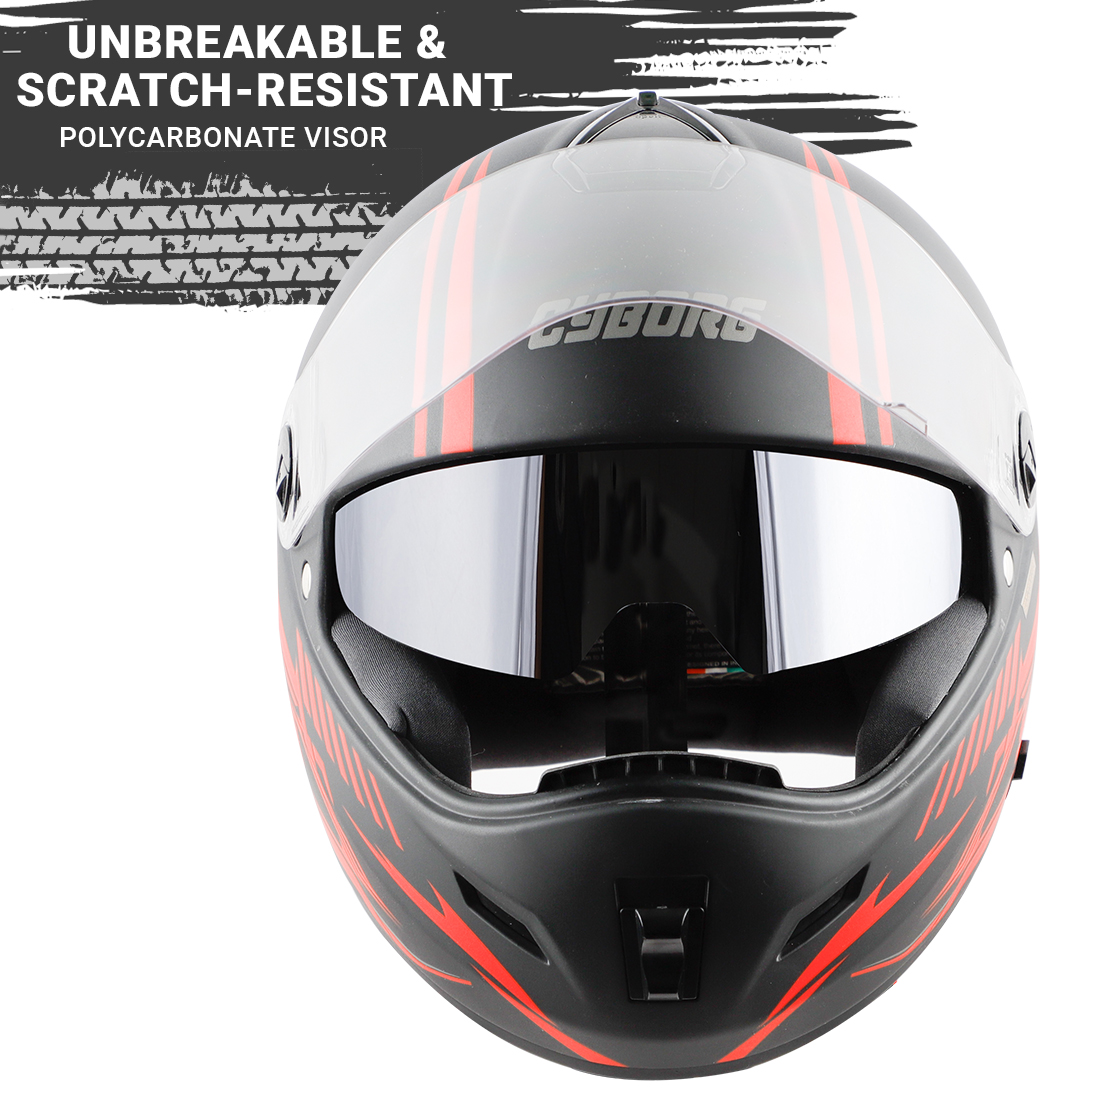 Steelbird Cyborg Cipher Full Face Helmet With Chrome Silver Sun Shield, ISI Certified Helmet (Glossy Black Red)